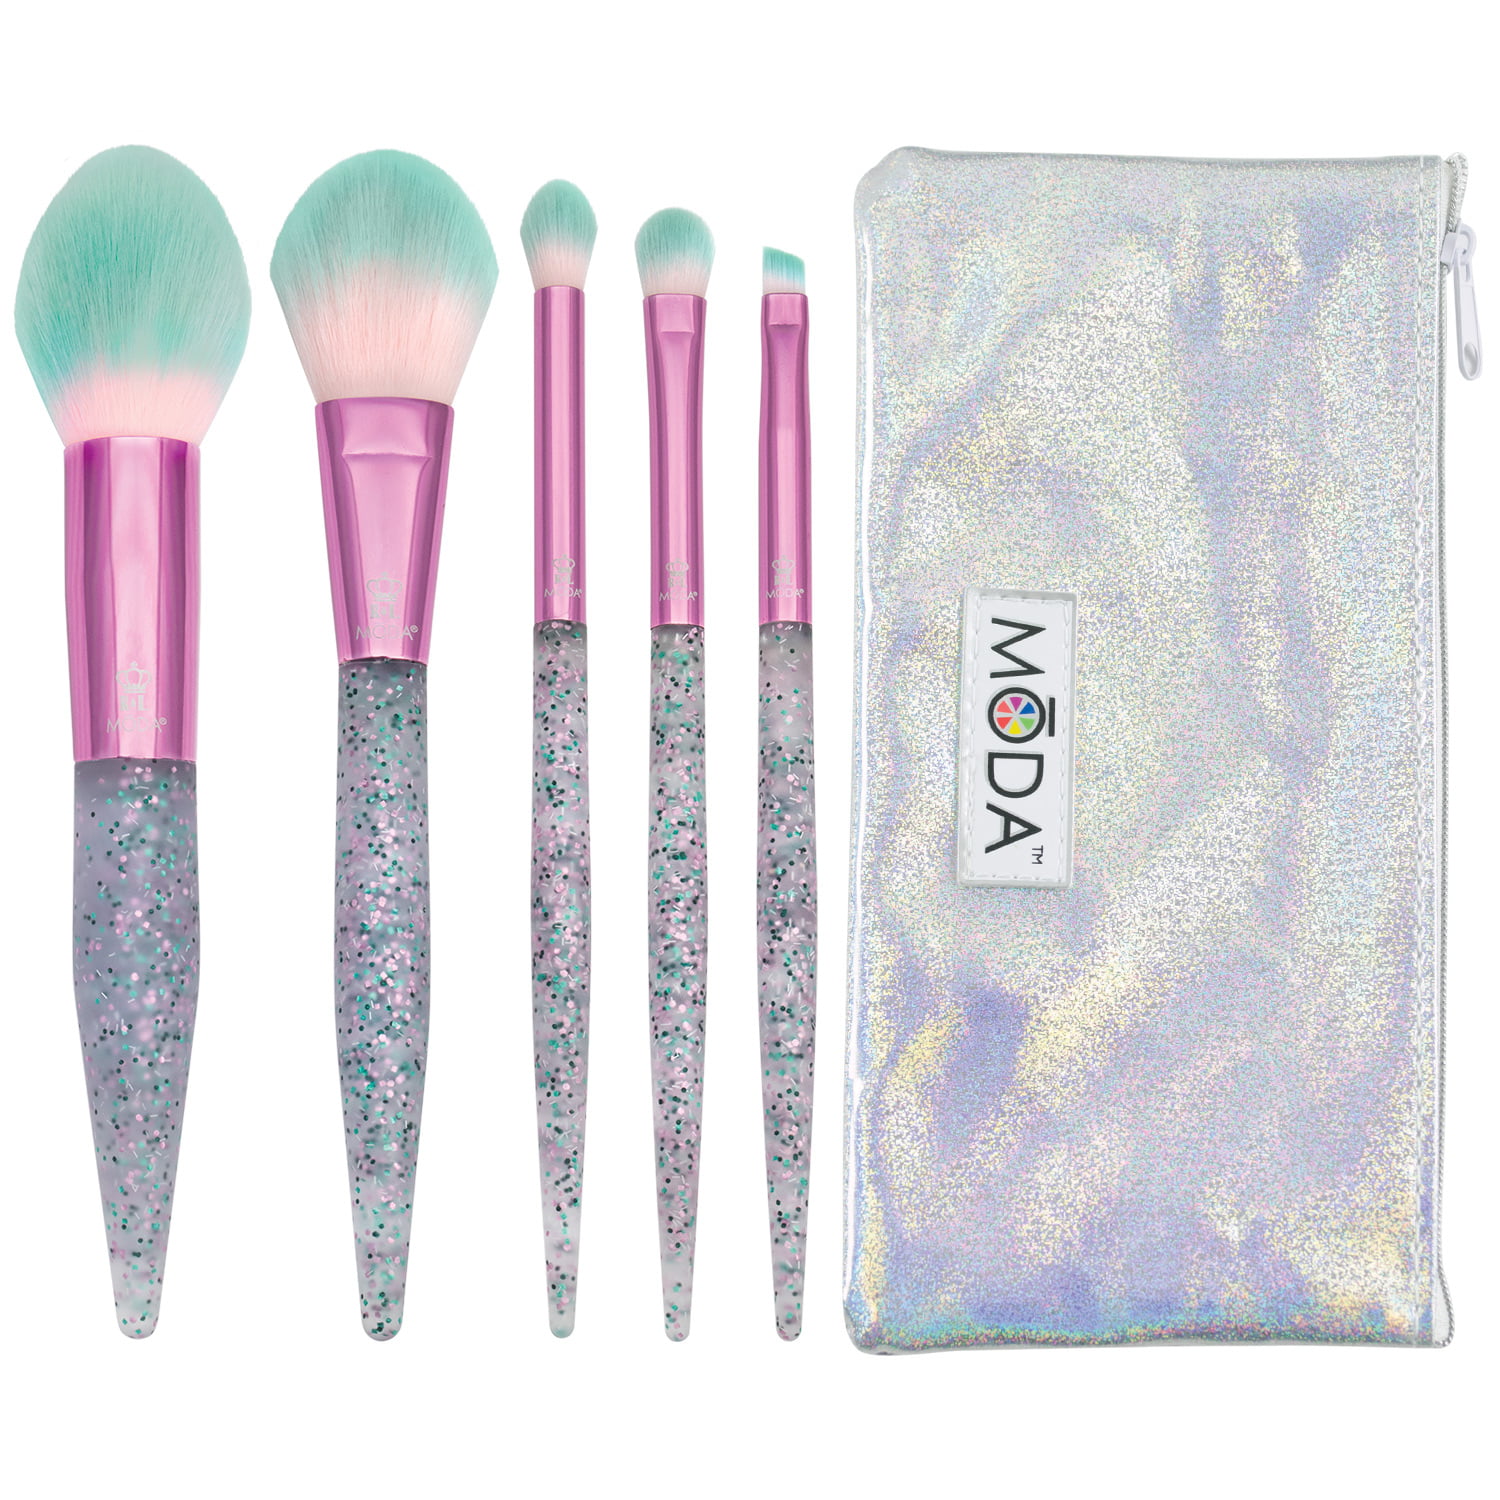 Photo 1 of MODA Full Size Glitter Bomb 6pc Complete Makeup Brush Kit with Pouch Includes, Pointed Powder, Blush, Crease, Eye Shader, and Liner Brushes, Pink